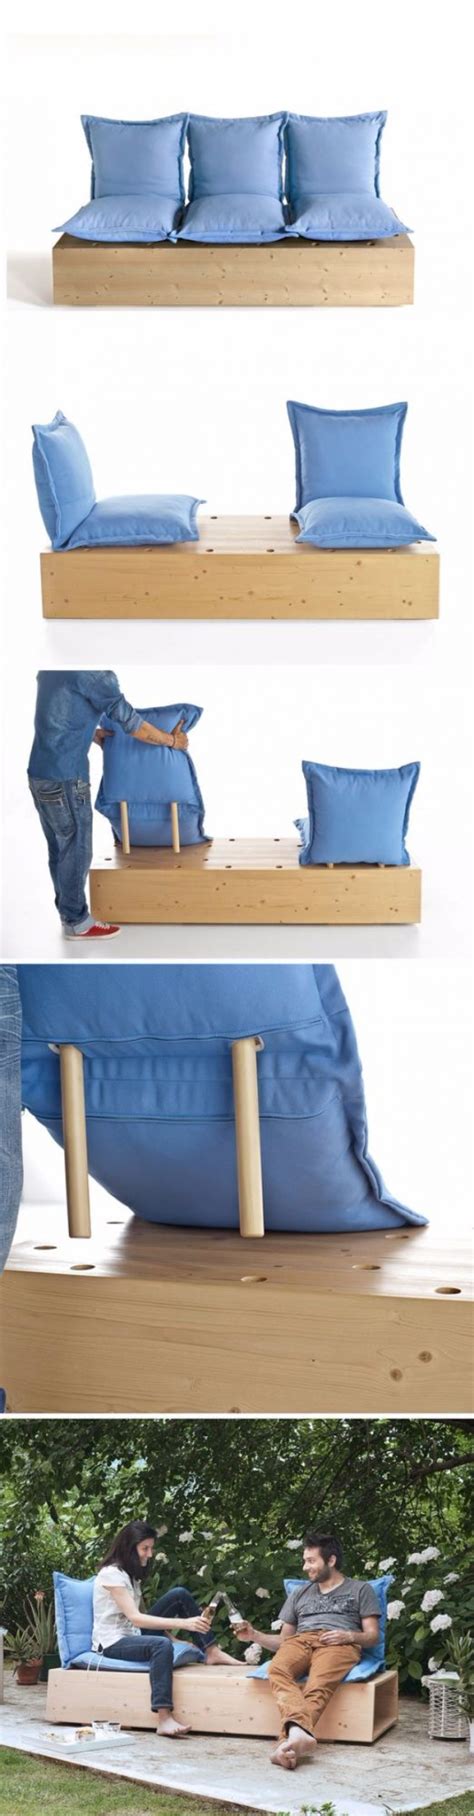 50 diy furniture projects with step by step plans. 15 Cool DIY Couch Ideas For Indoors And Outdoors